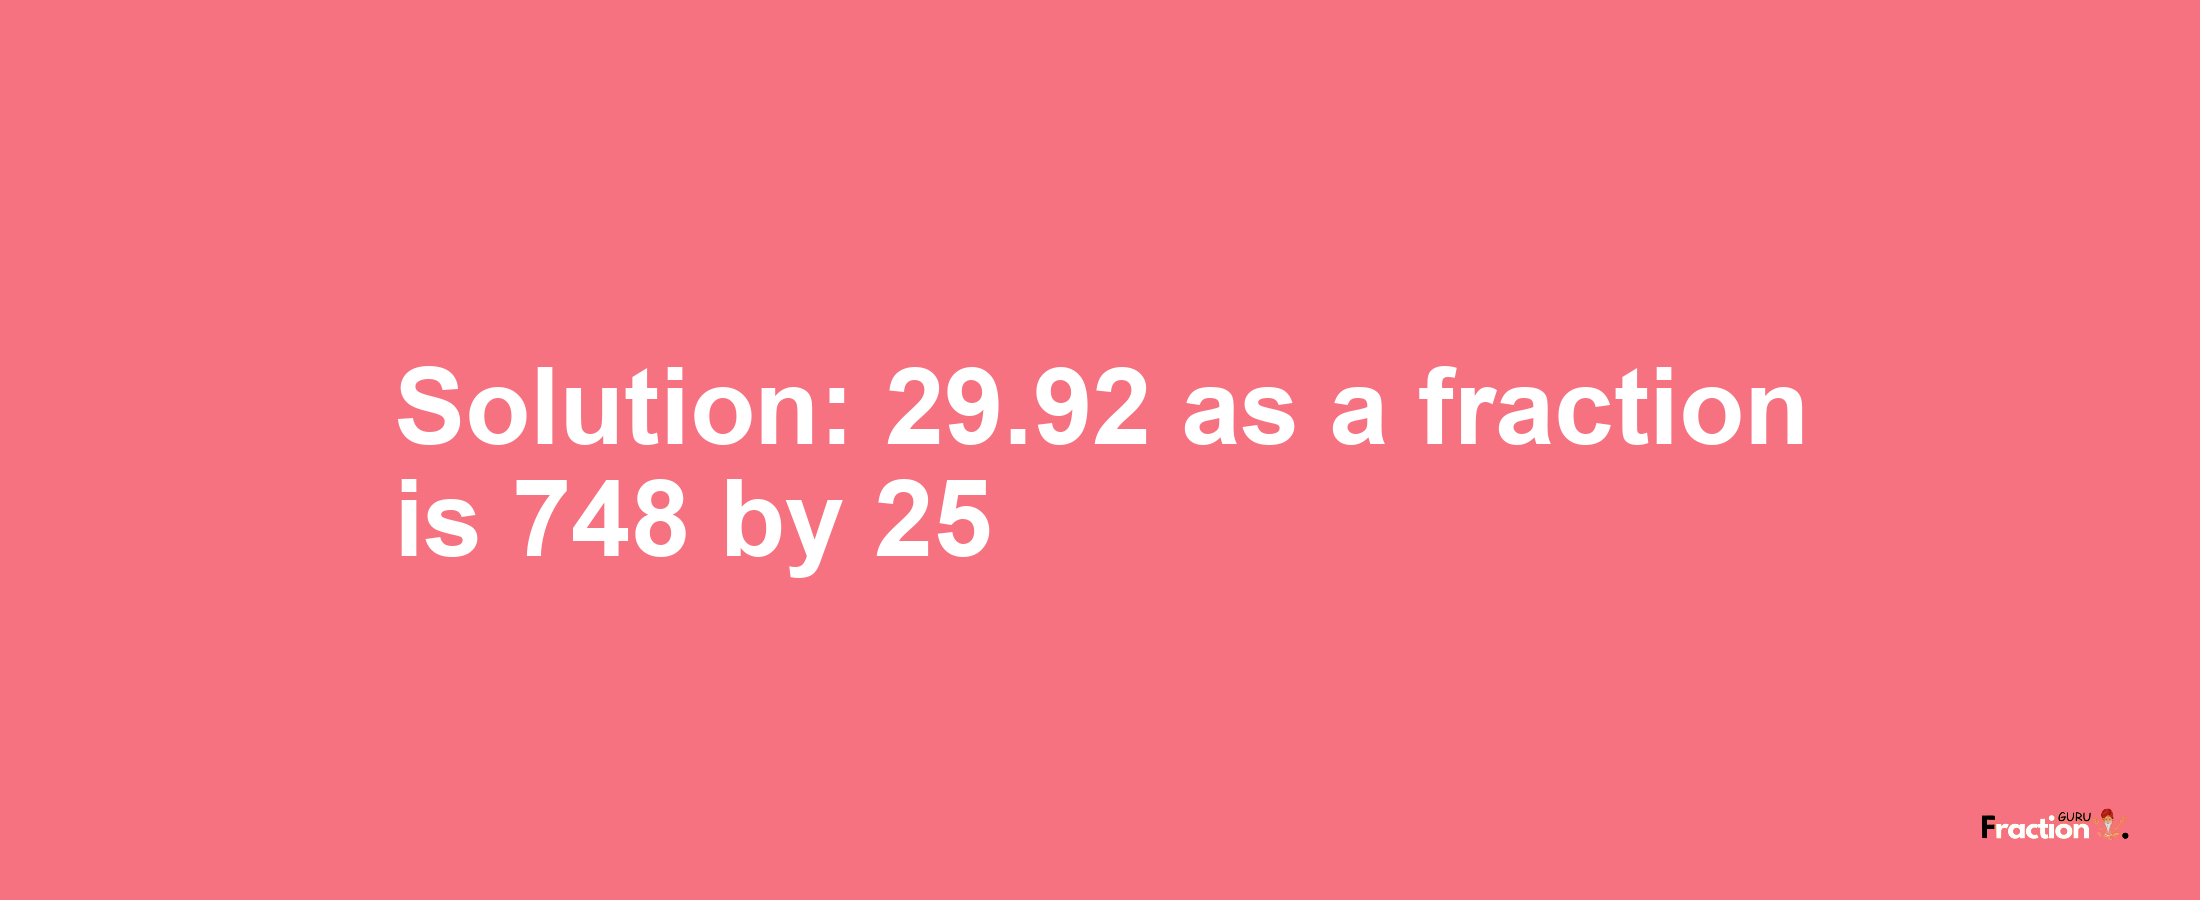 Solution:29.92 as a fraction is 748/25